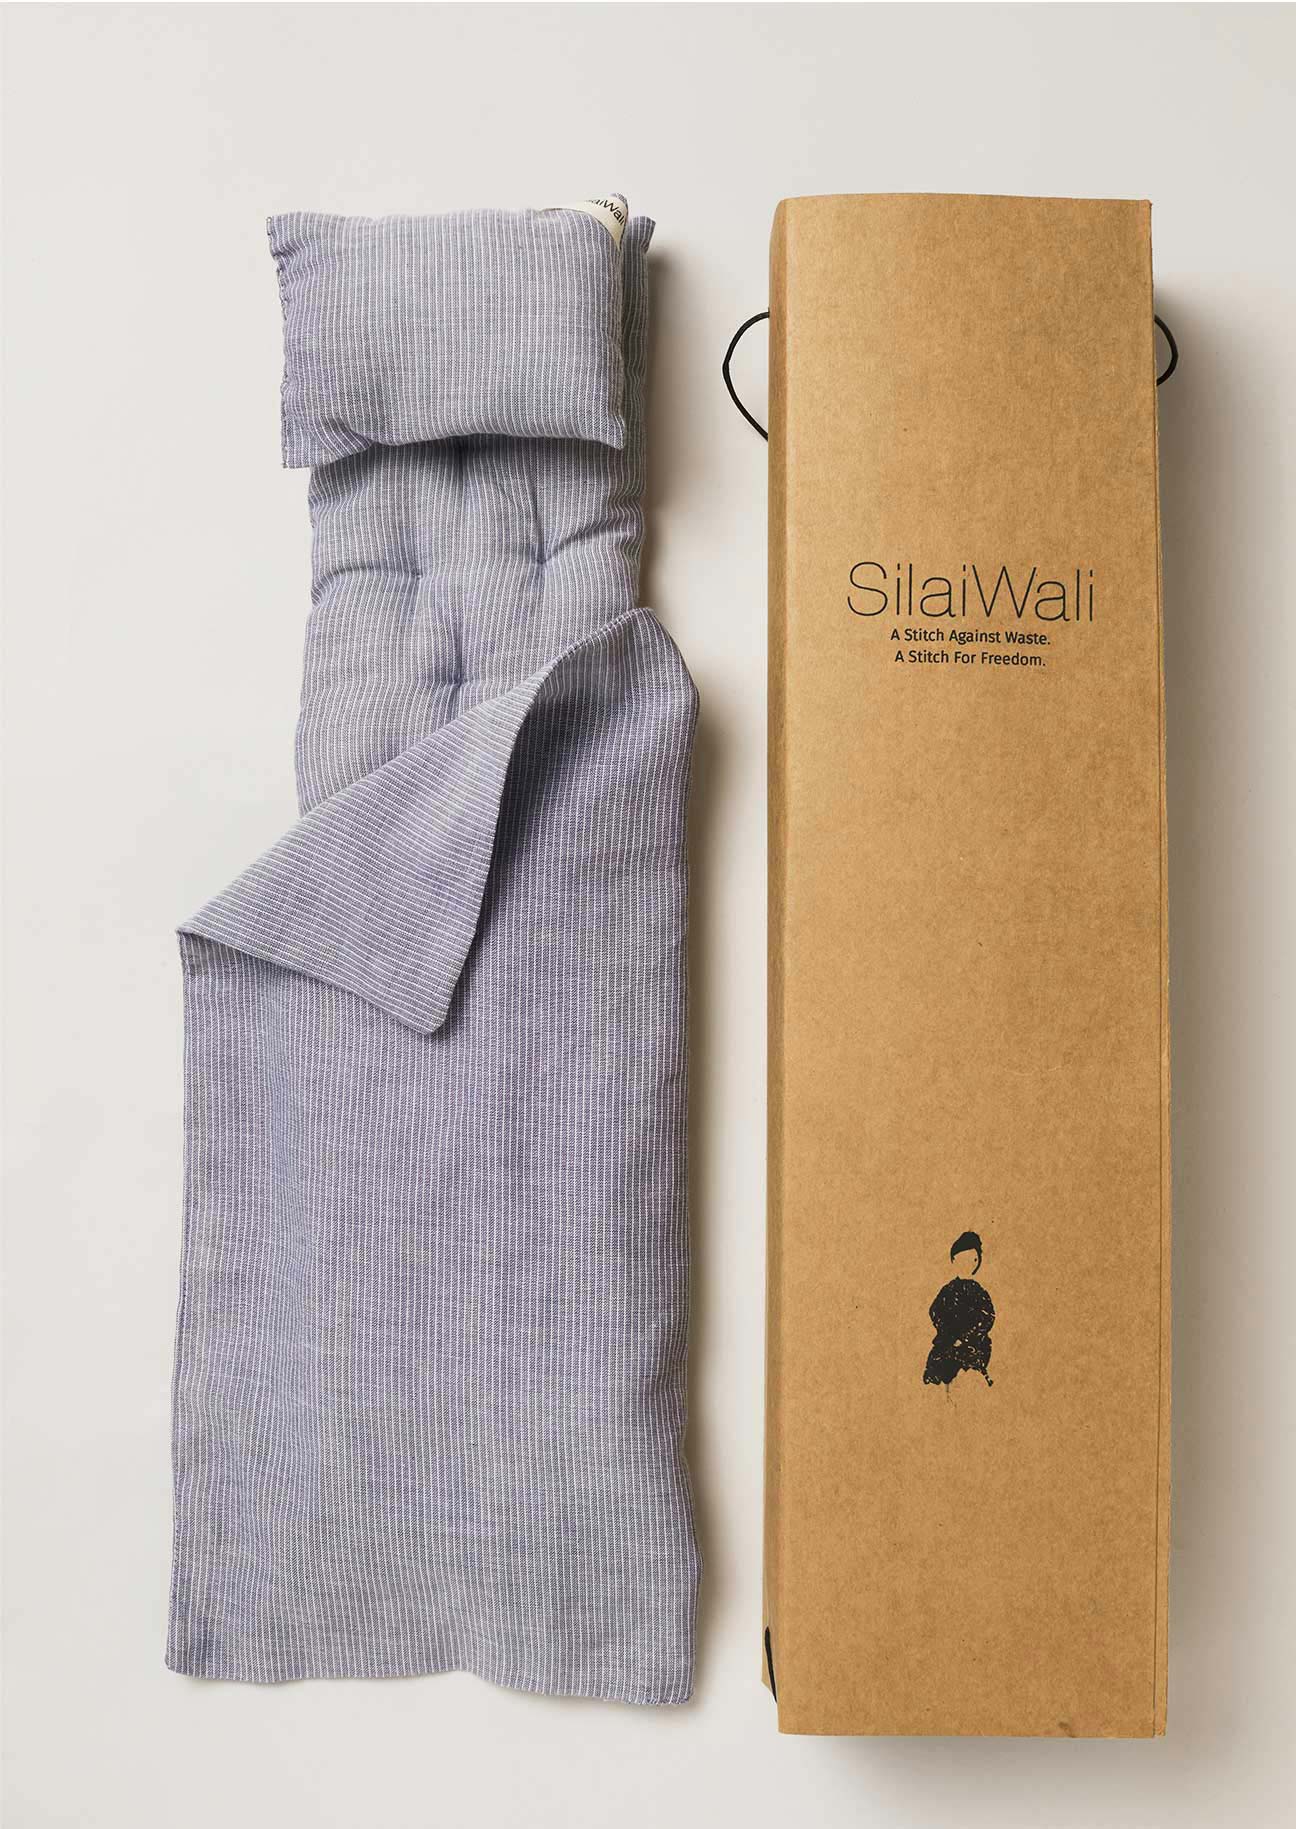 SilaiWali studio recycled cardboard box and bedlinen for doll storage.